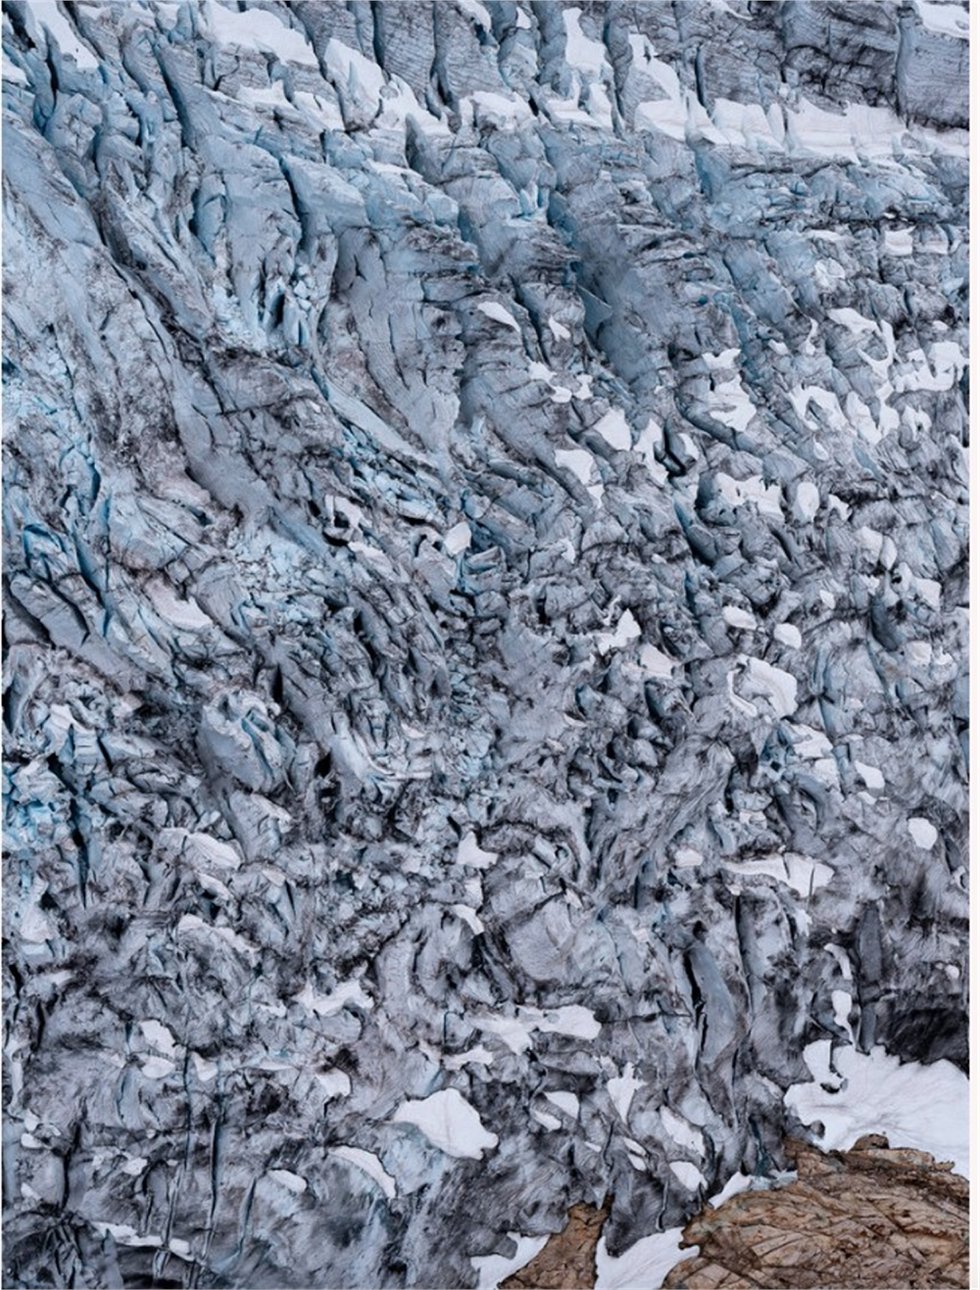 Kevin Boyle, "Icefield Study #15, | Waterfall," 2018